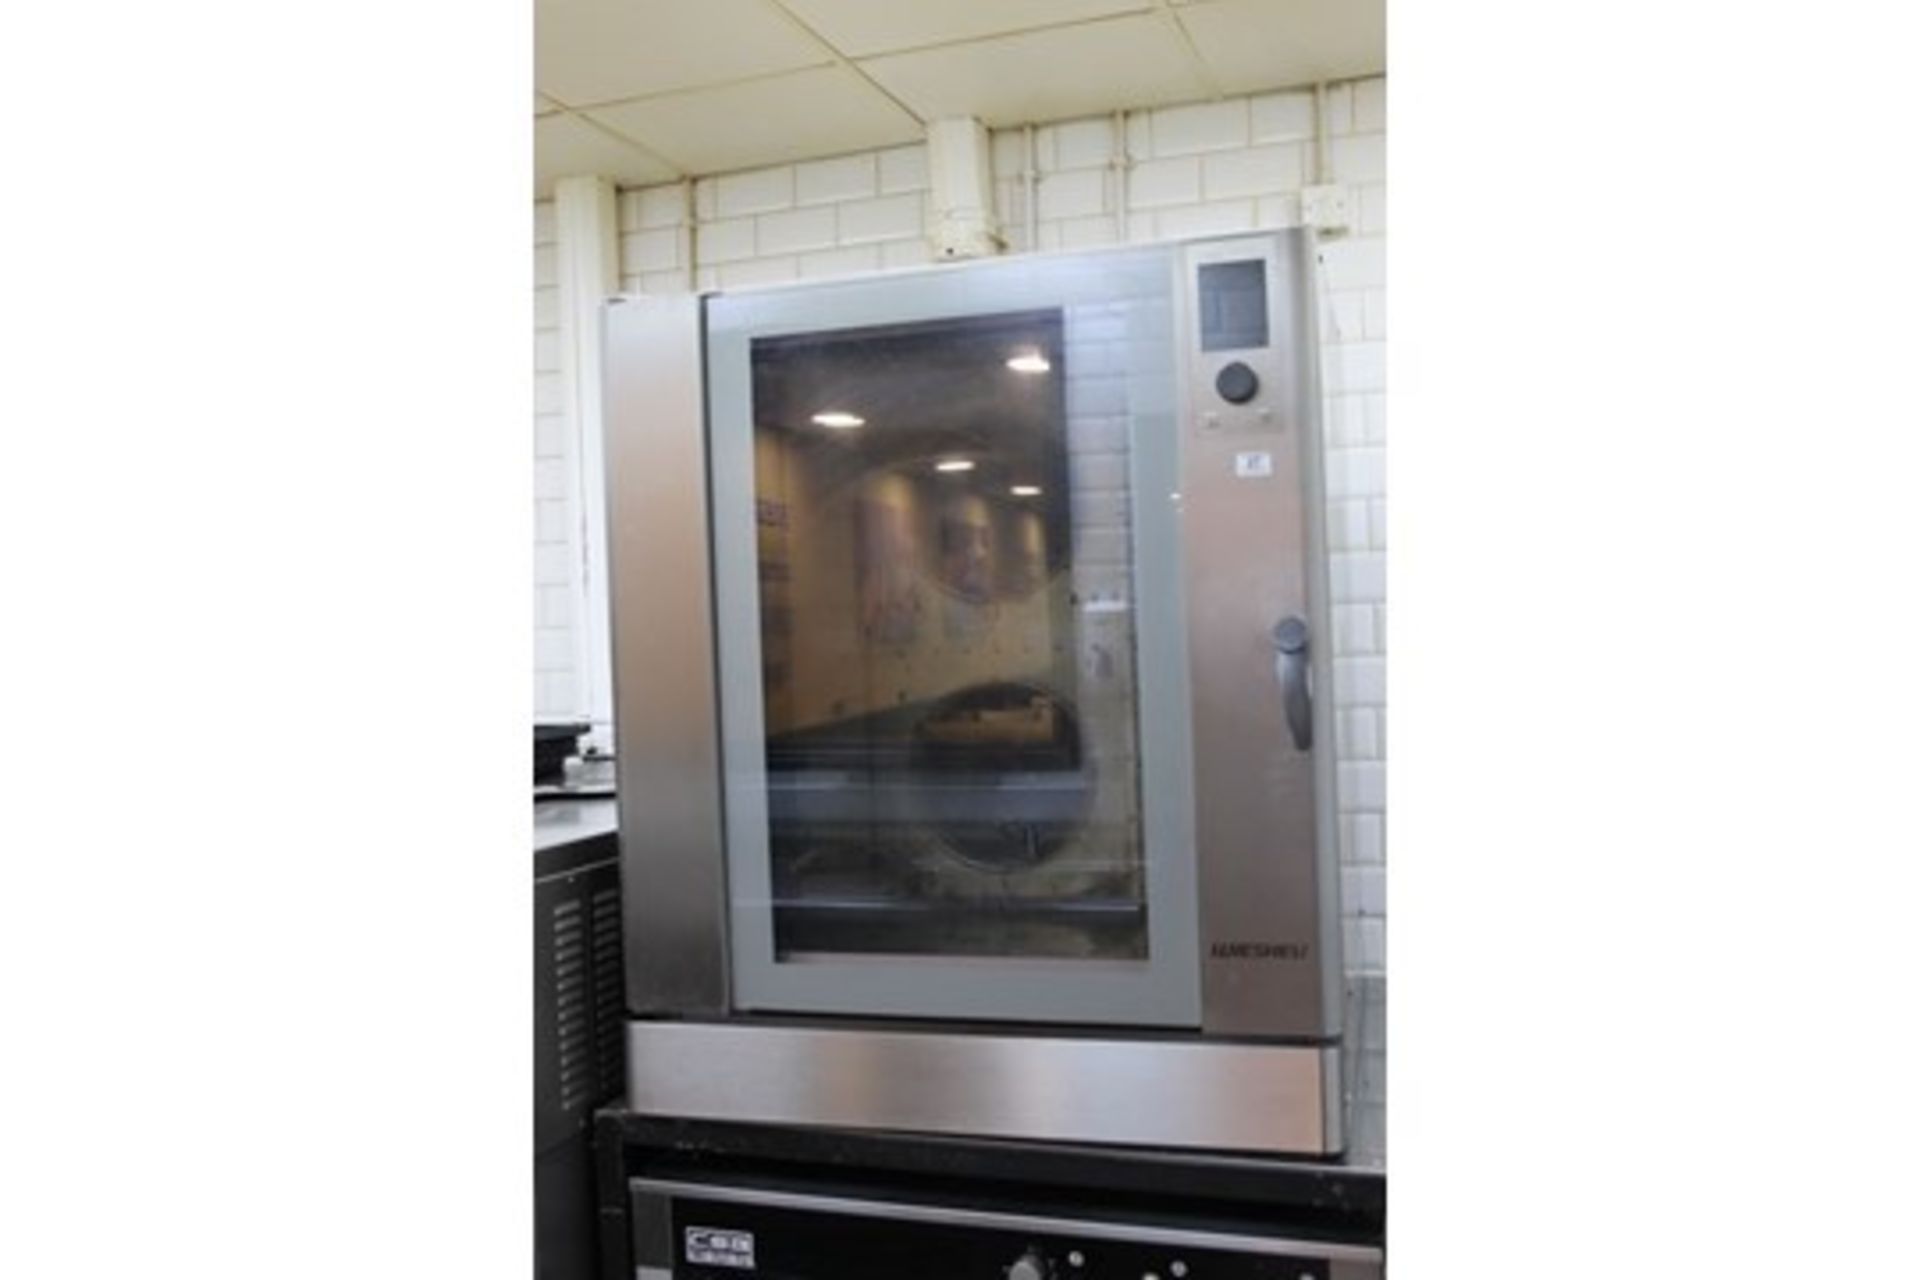 WIESHEU 10 Grid Electric Combi / Steam Oven – 3ph – Excellent “as new” condition This item only used